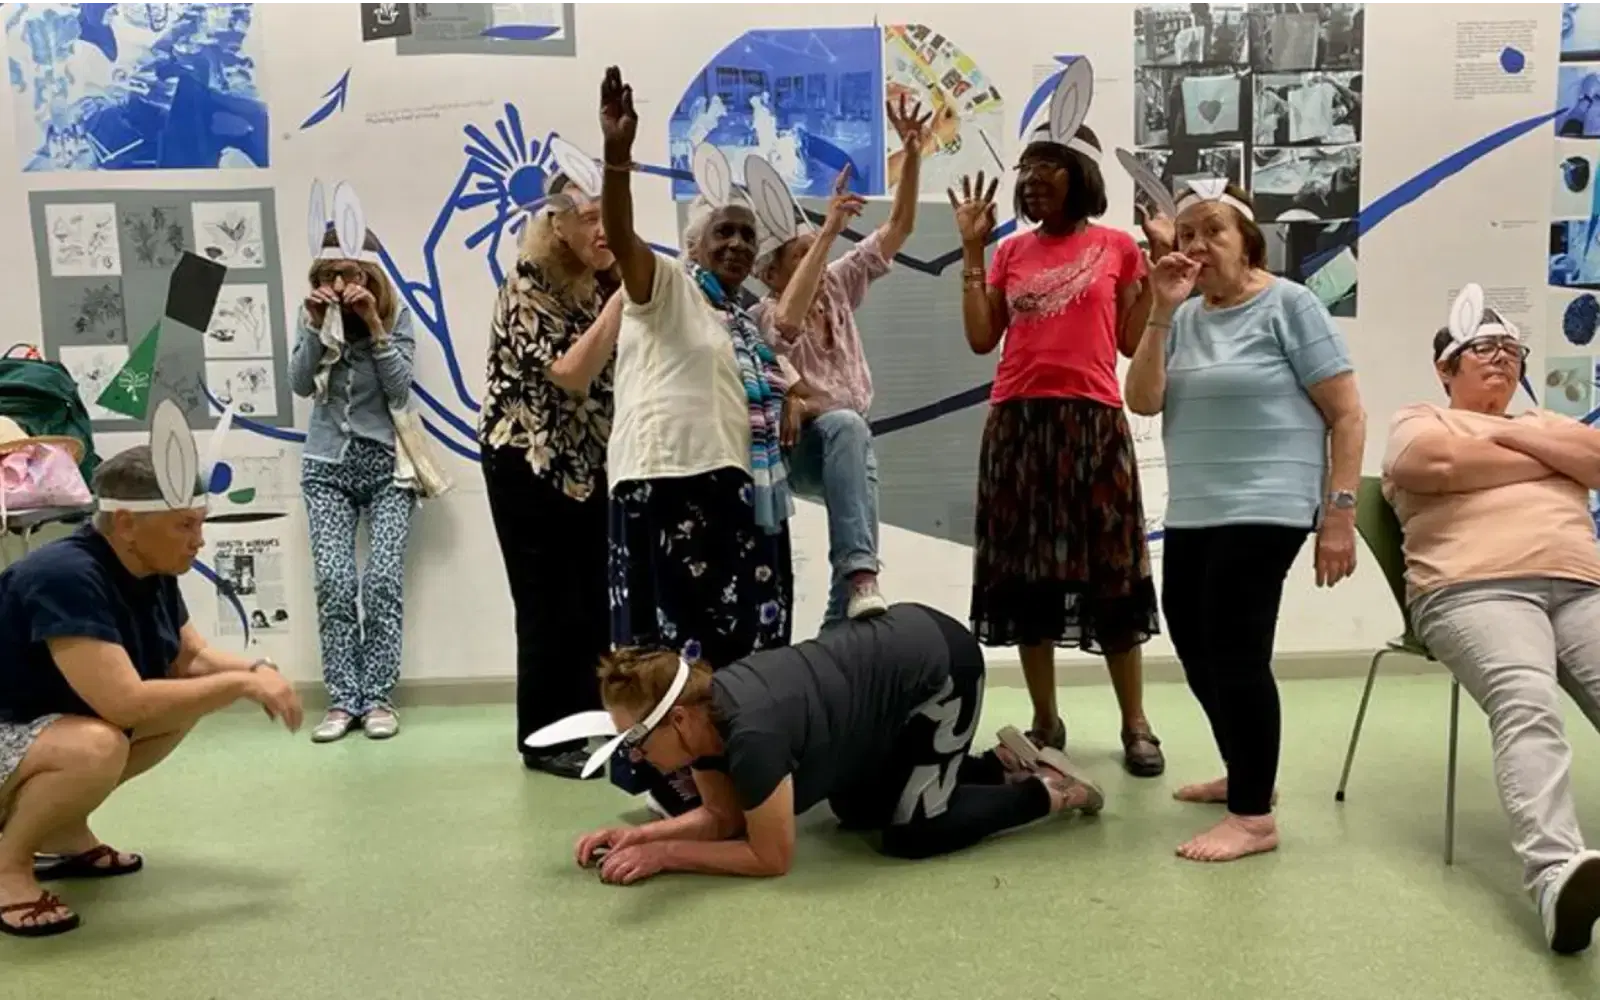 A group of people expressing themselves actively in a playful and theatrical setting, possibly during a workshop or a group activity, with some wearing whimsical hats and one person playfully kneeling on the floor.